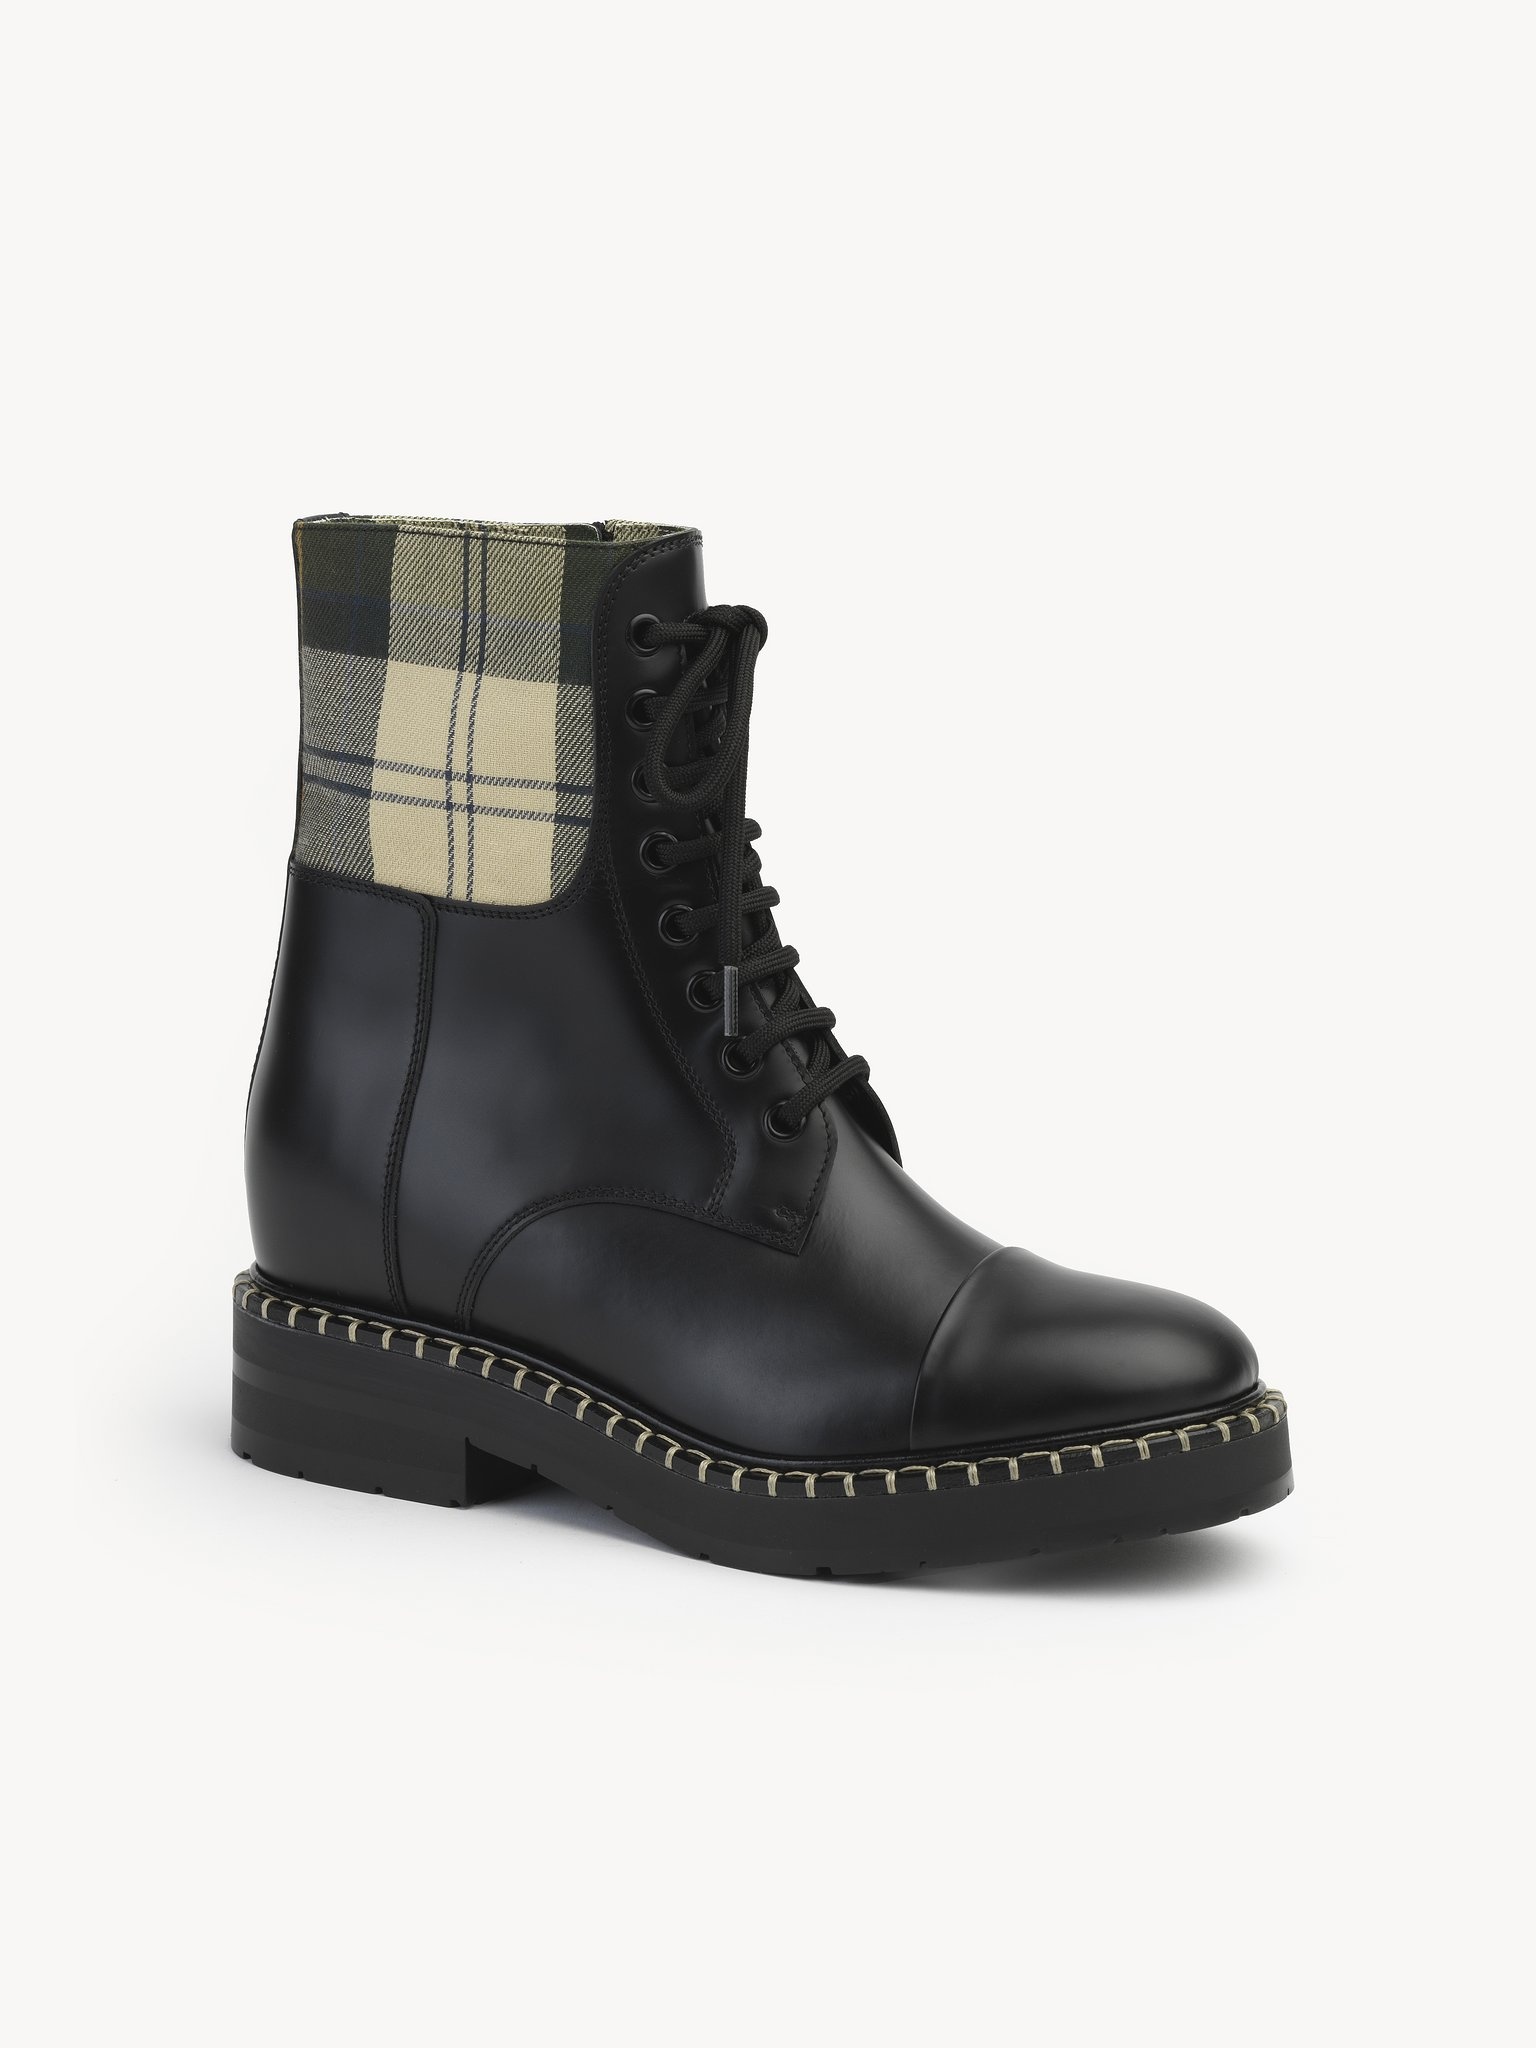 BARBOUR FOR CHLOÉ ANKLE BOOT - 2